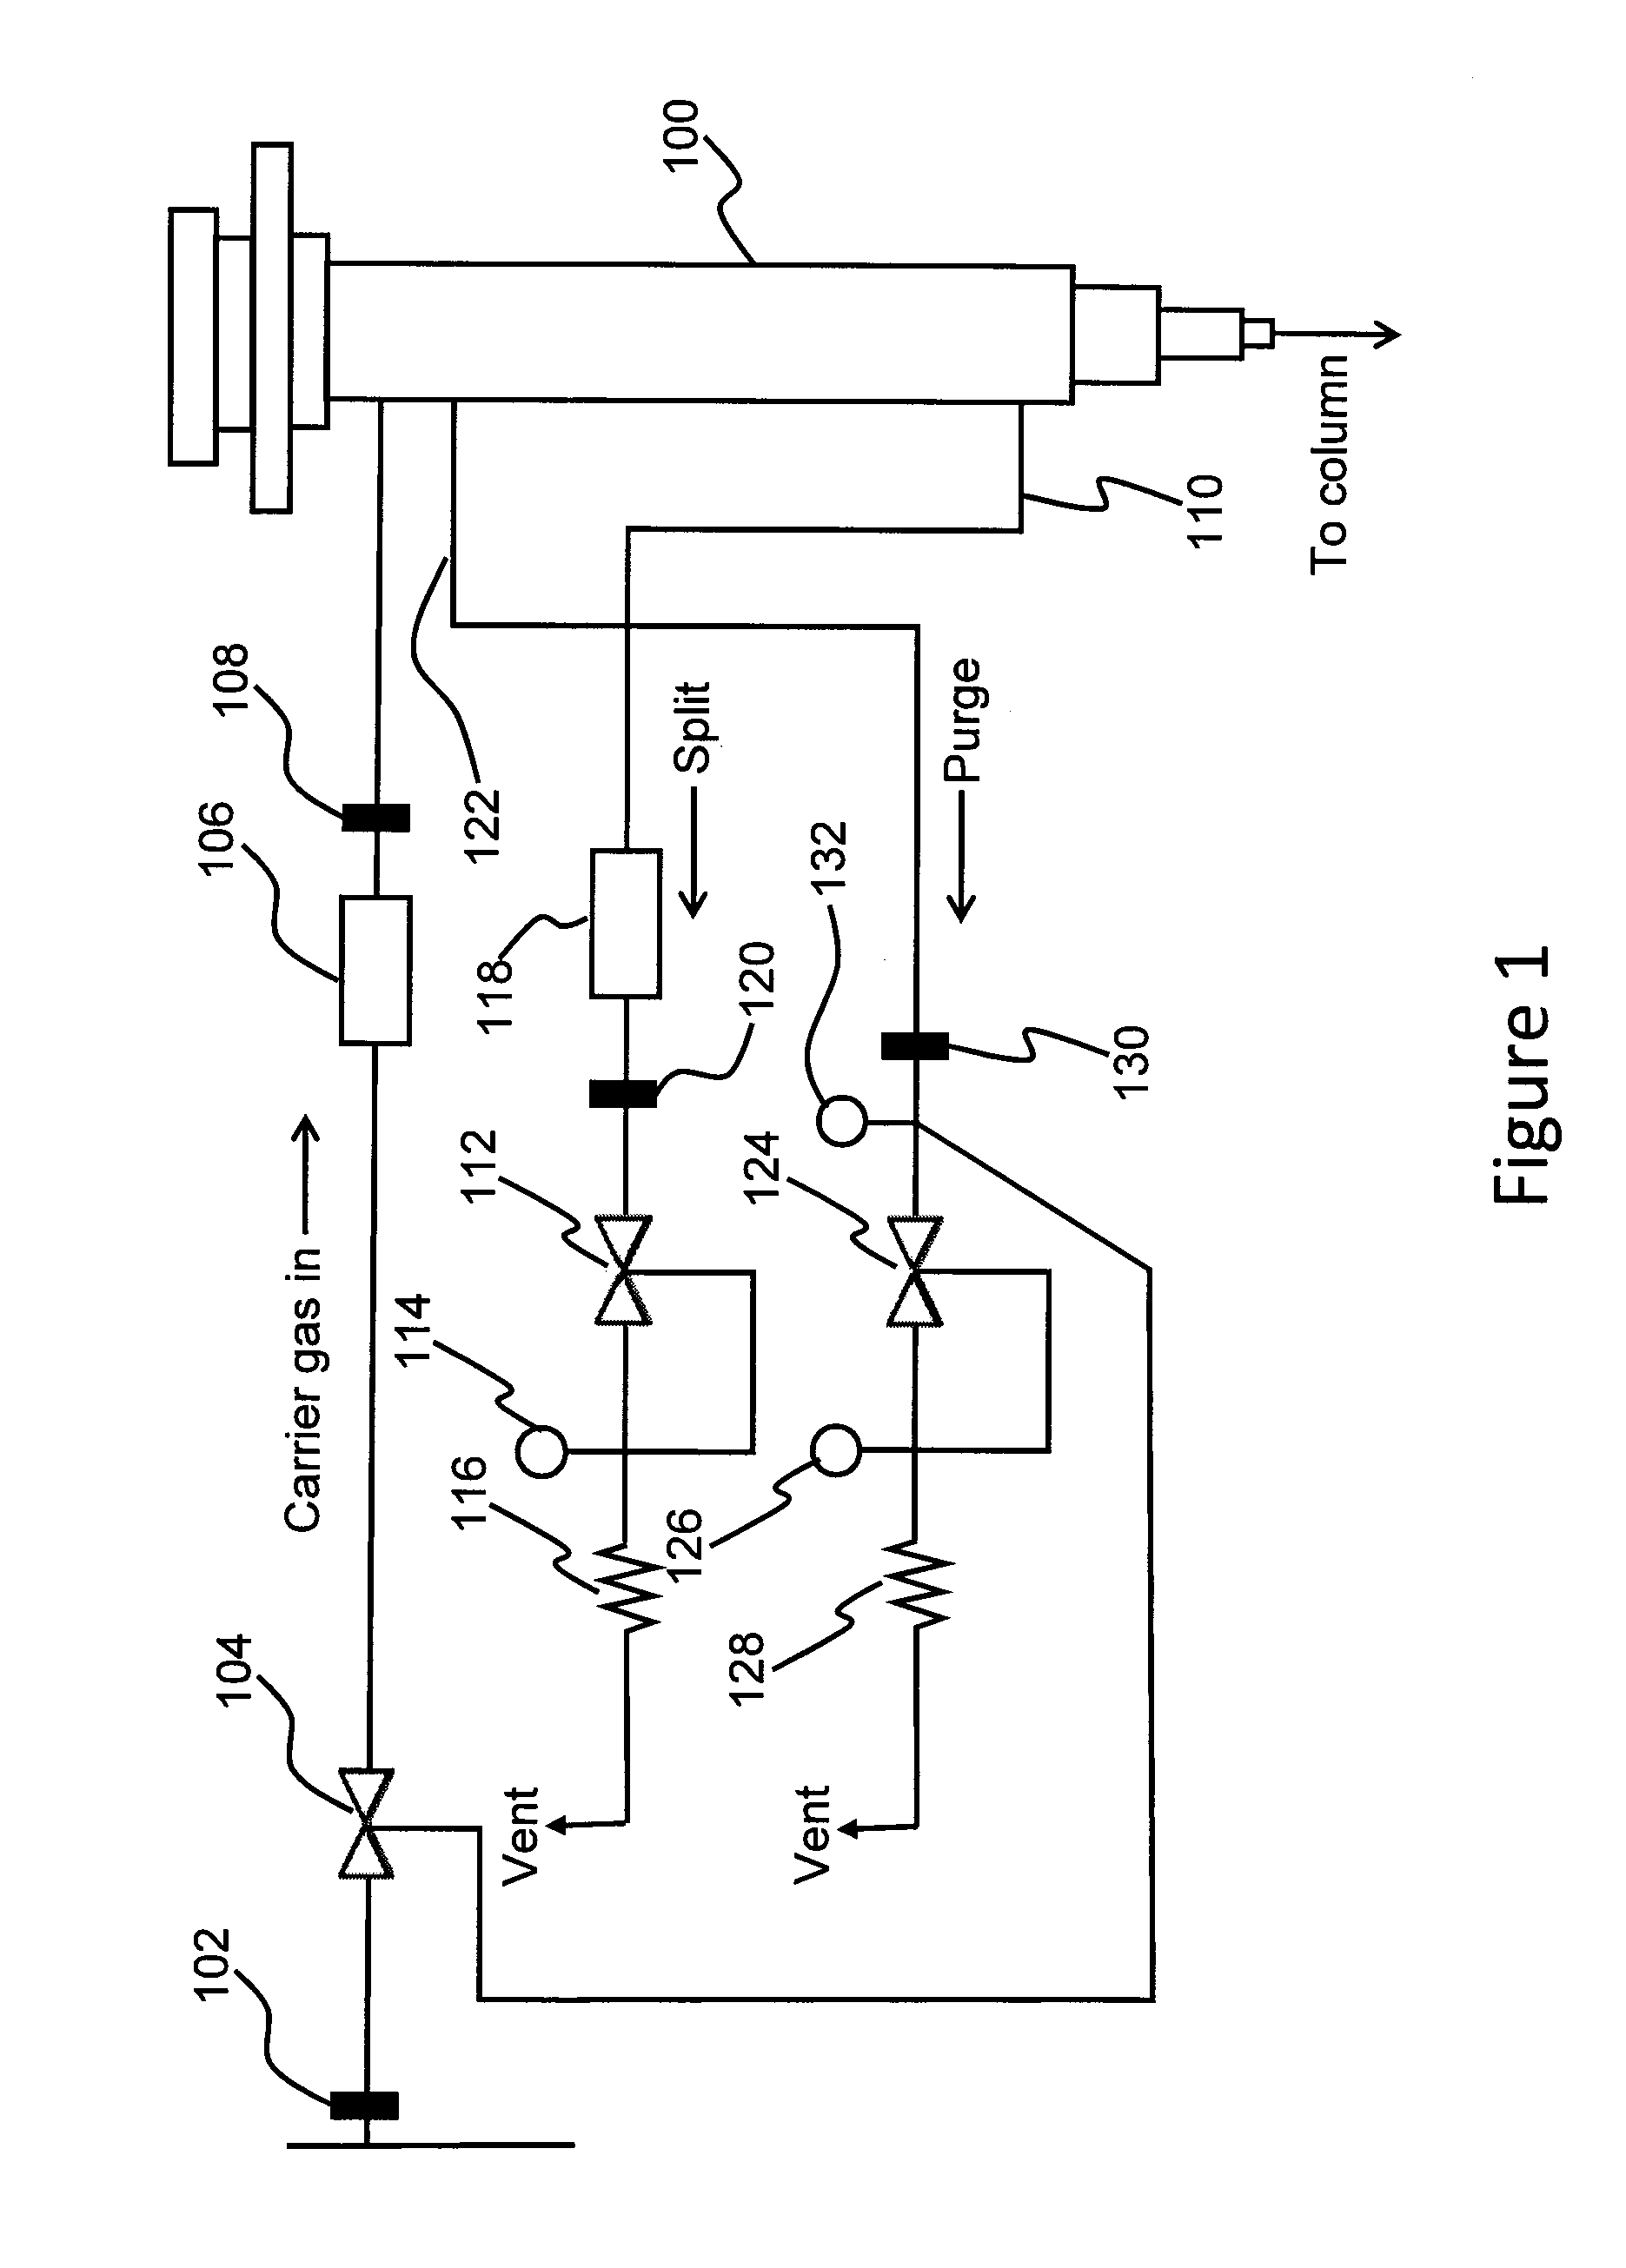 Method for determining a low cylinder pressure condition for a gas chromatograph